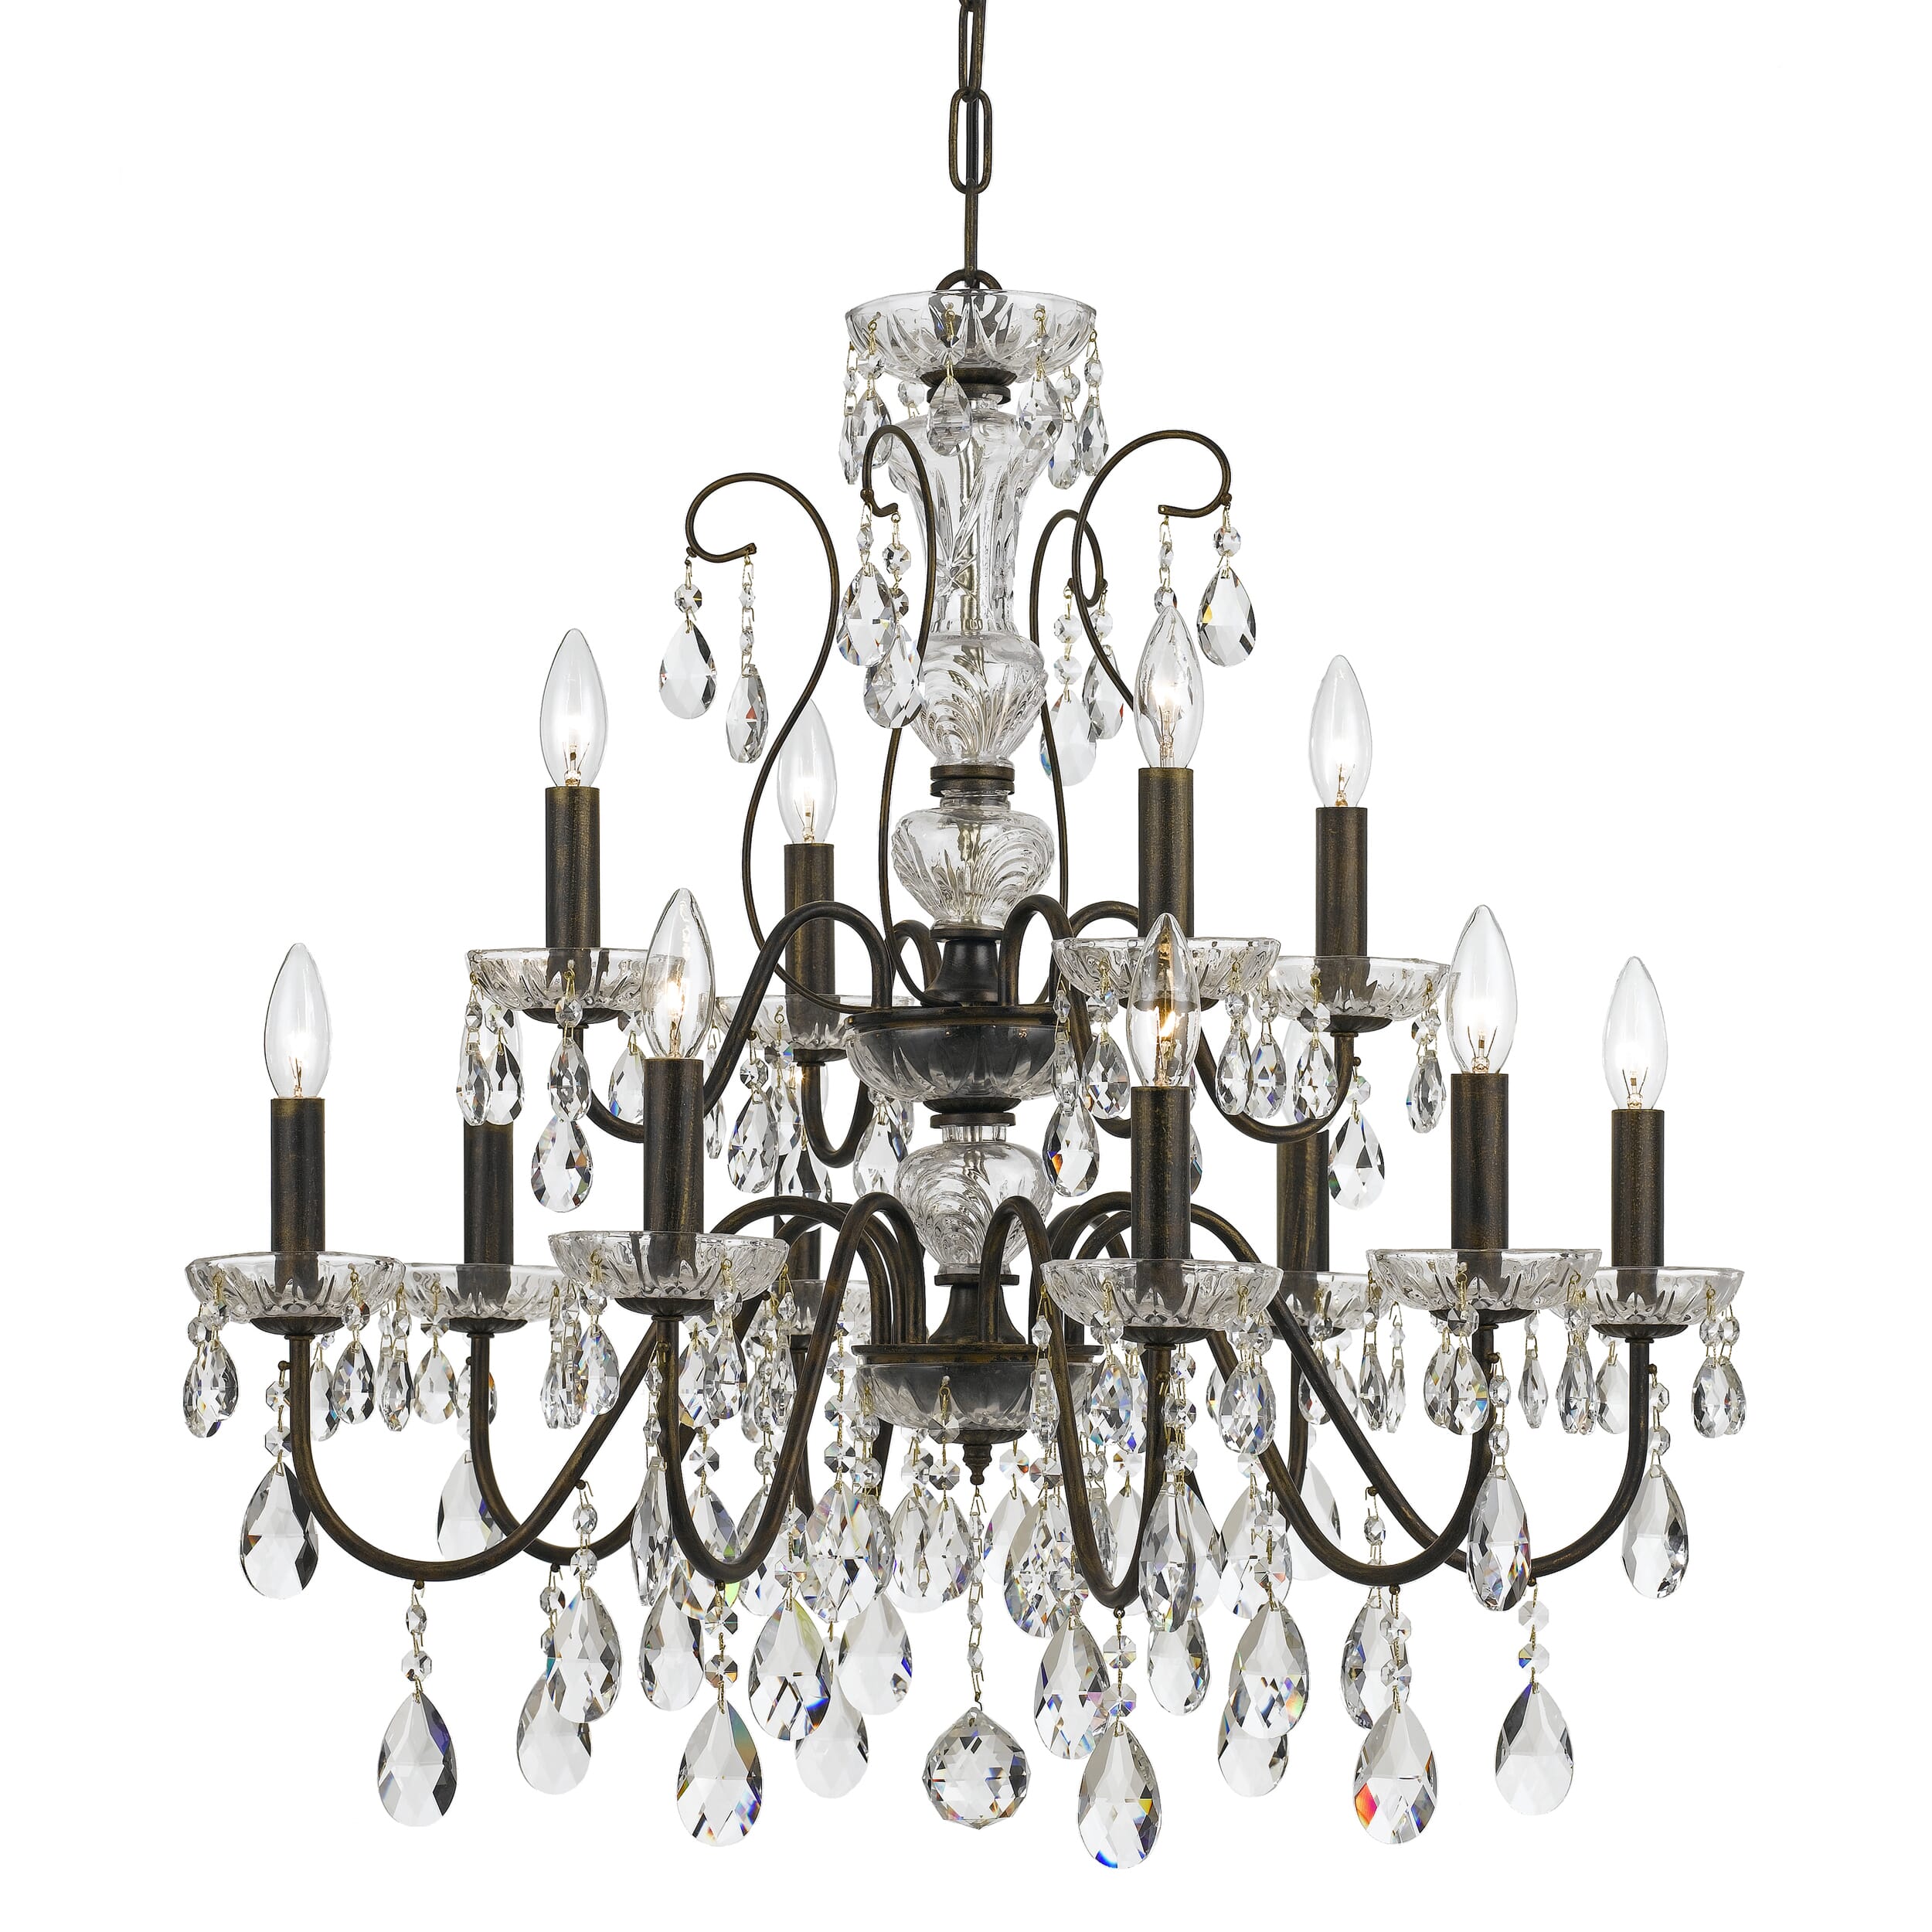 Butler 12-Light 29"" Chandelier in English Bronze with Hand Cut Crystal Crystals -  Crystorama, 3029-EB-CL-MWP